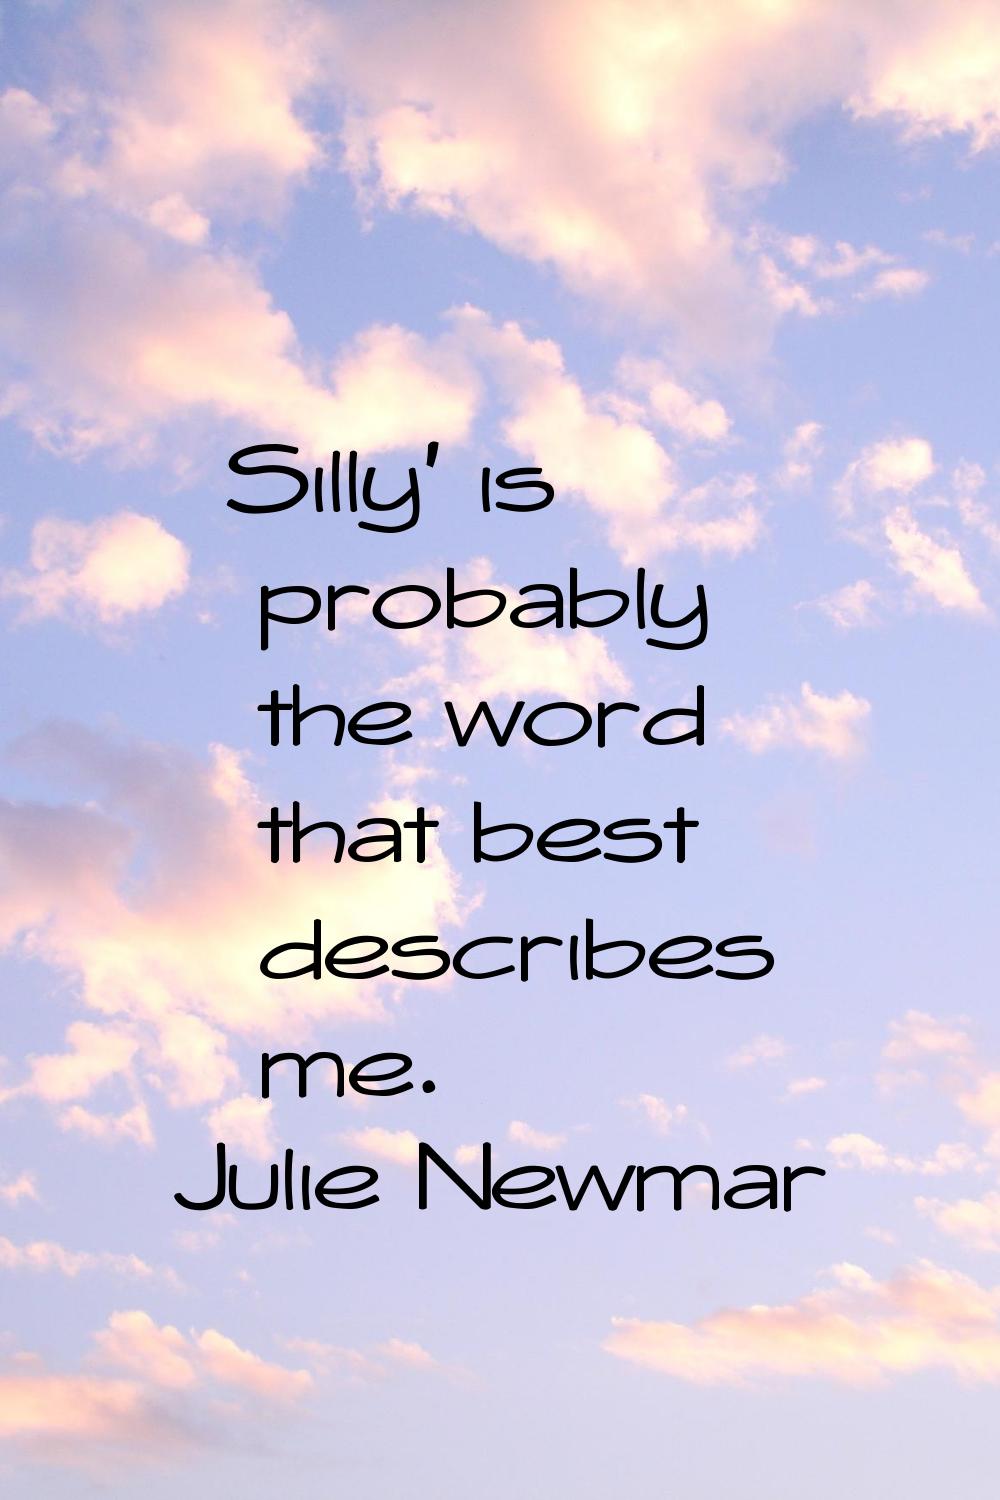 Silly' is probably the word that best describes me.